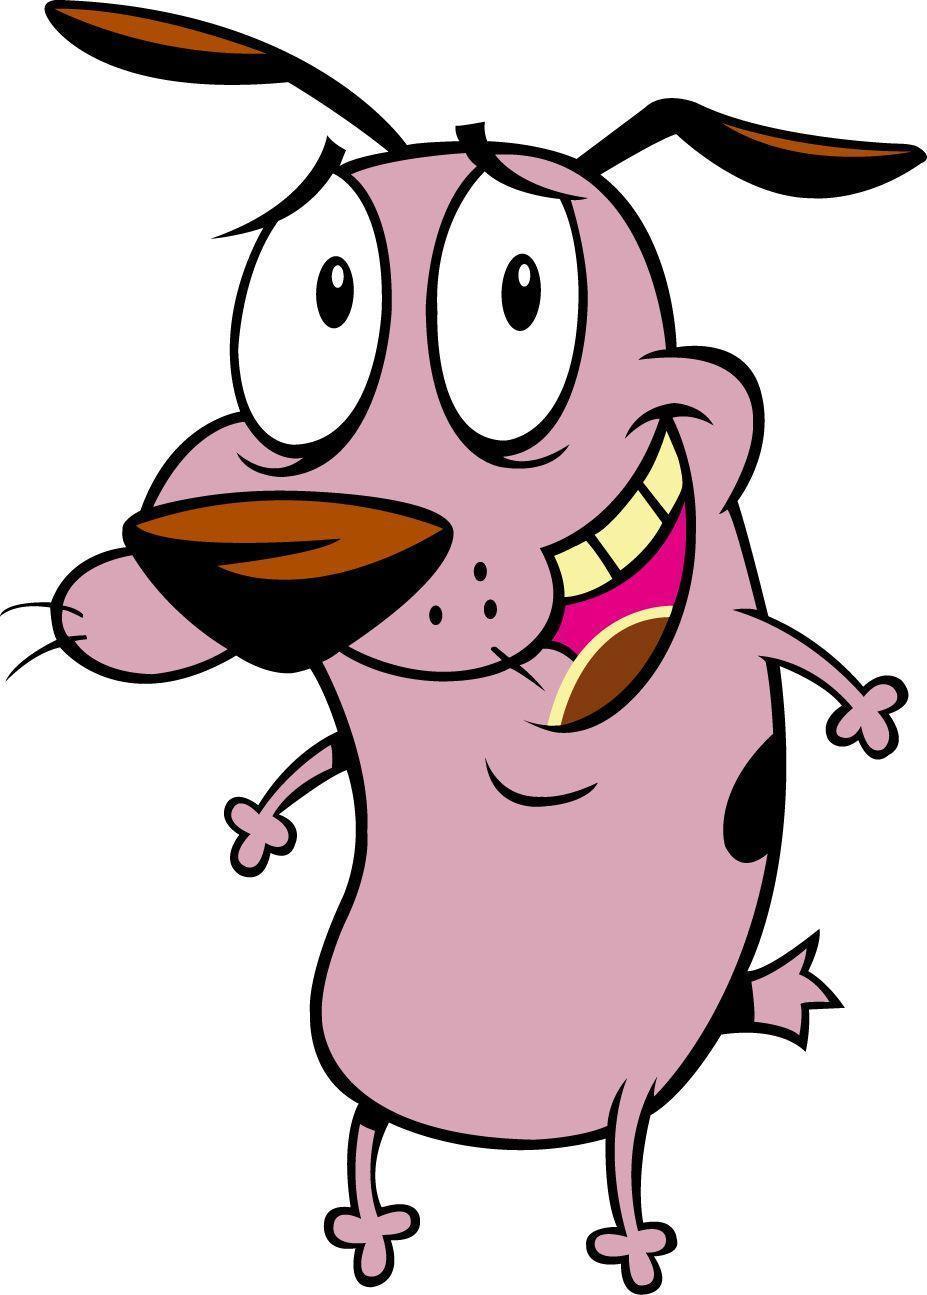 900x650px Courage The Cowardly Dog (106.15 KB).04